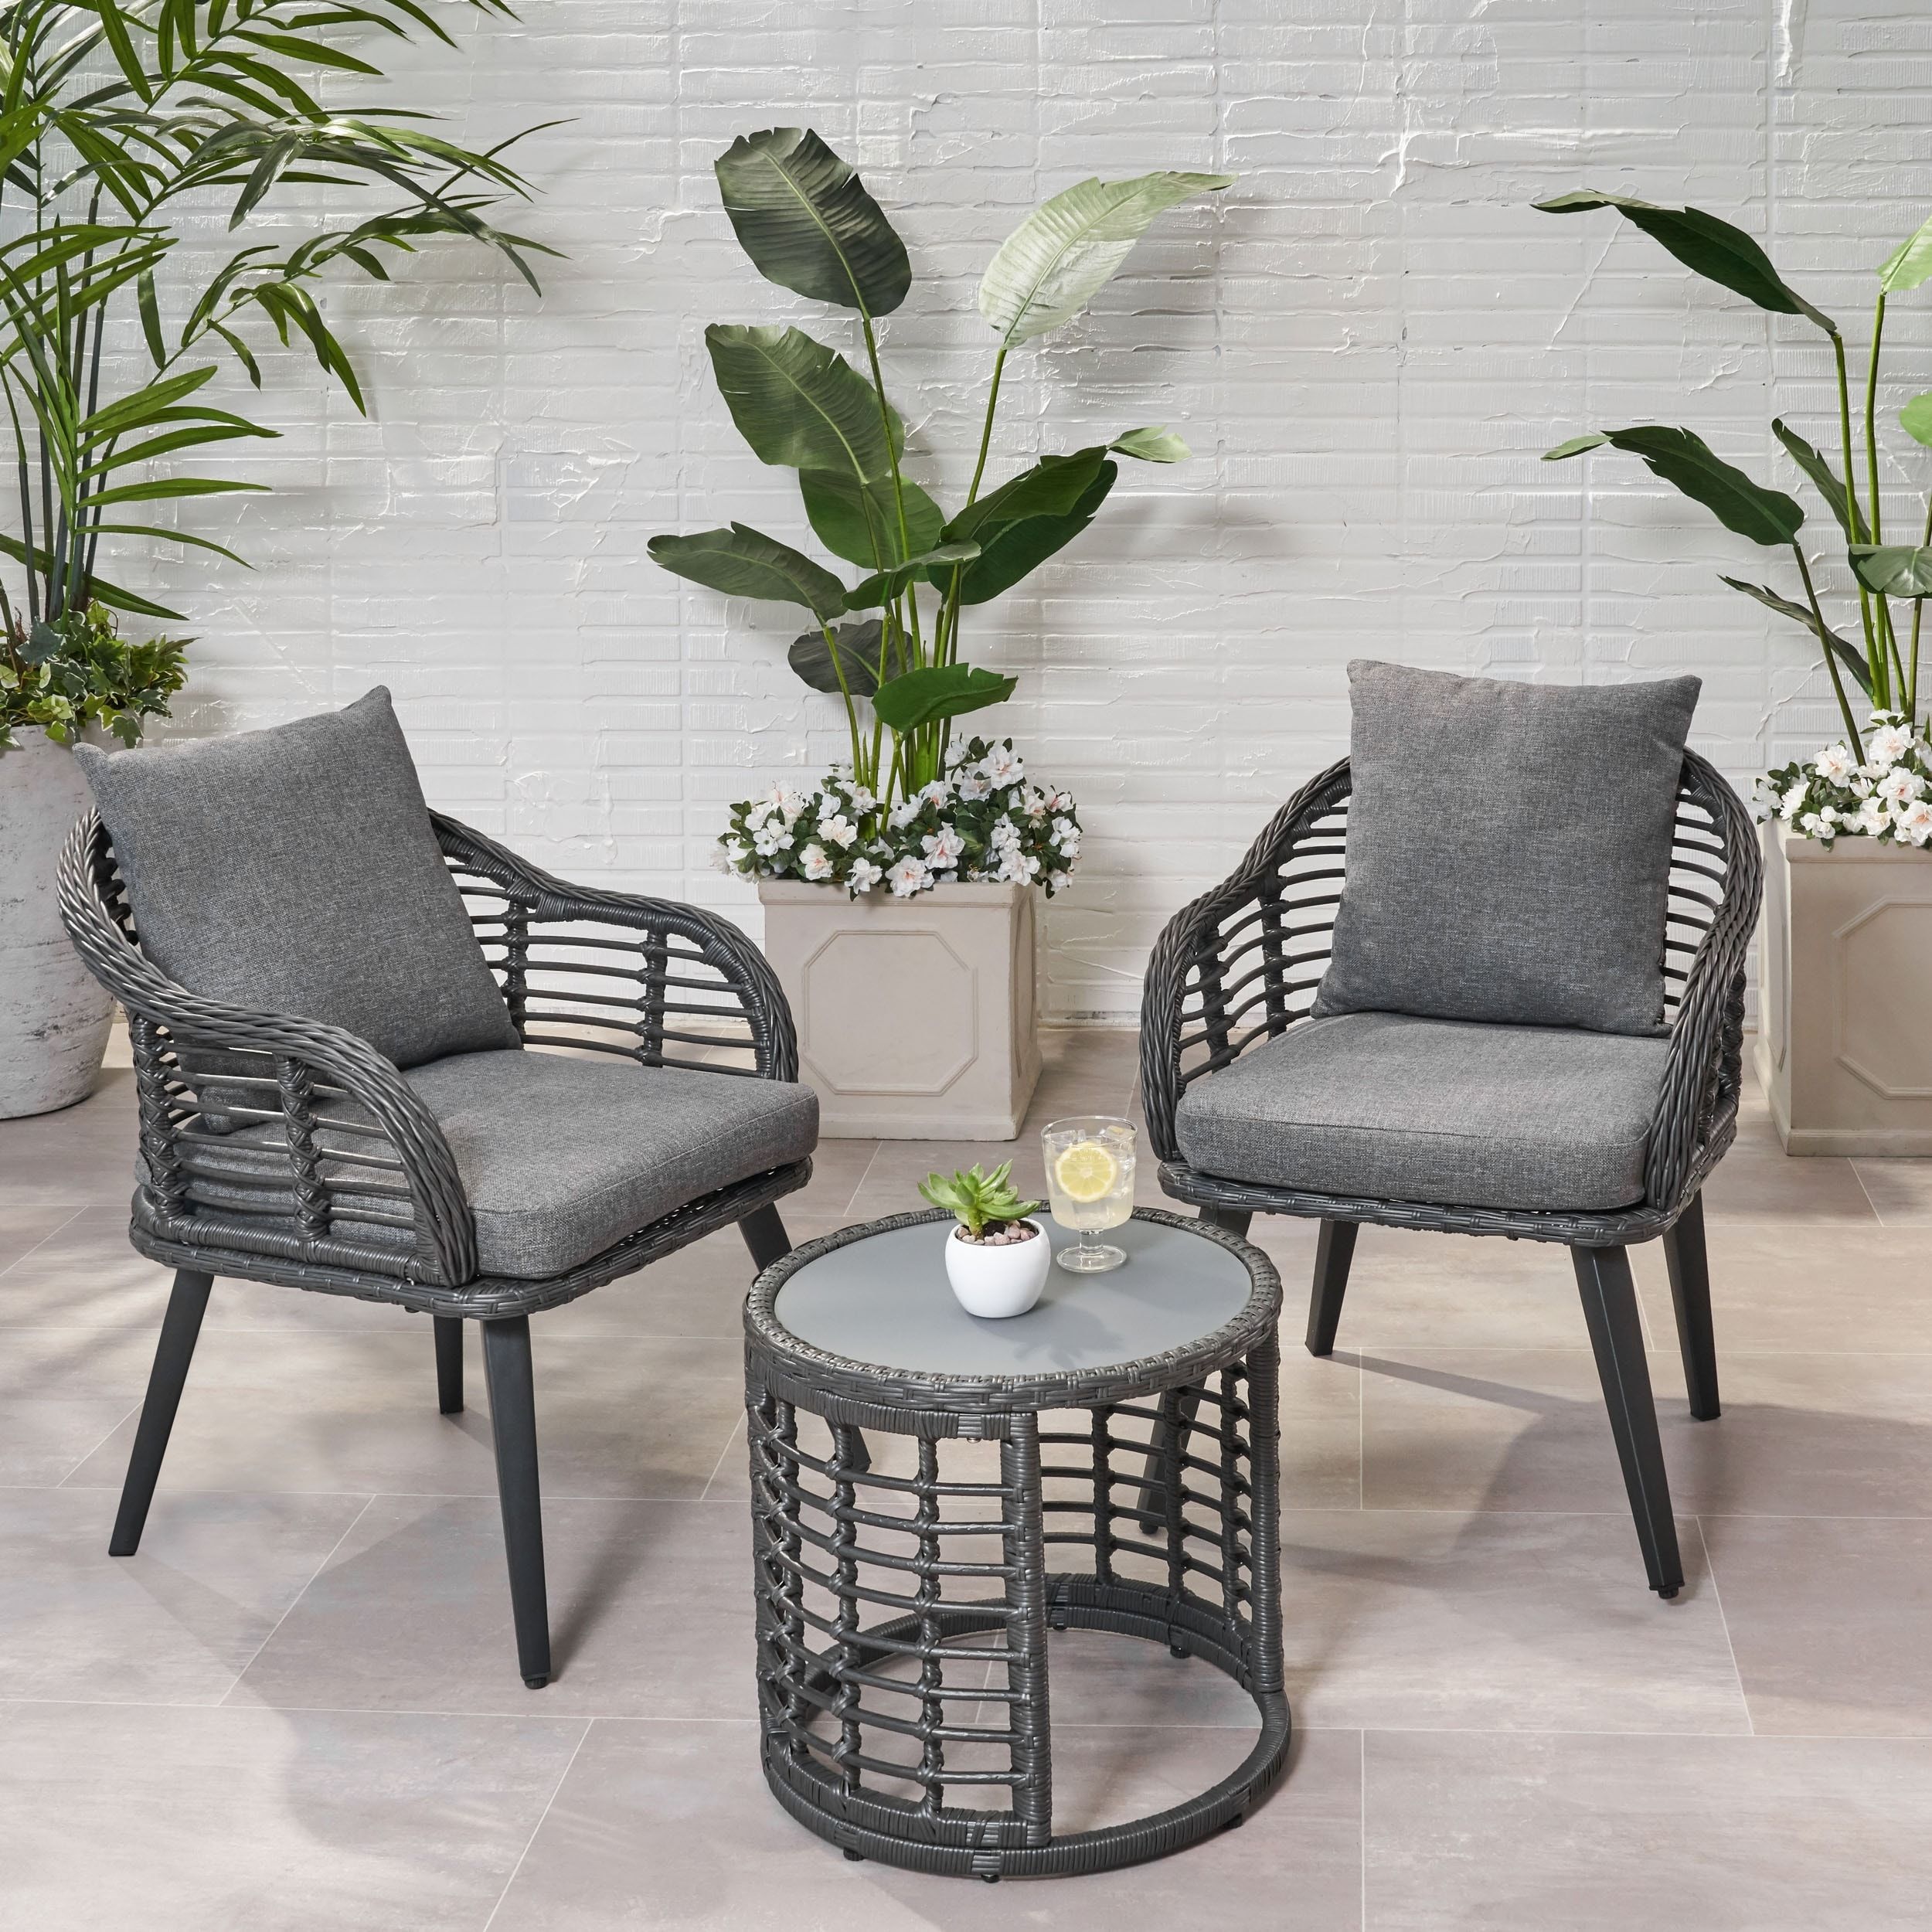 Tatiana Outdoor 3 Piece Boho Wicker Chat Setchristopher Knight Home –  Overstock – 28987059 Within 3 Piece Outdoor Boho Wicker Chat Set (Photo 4 of 15)